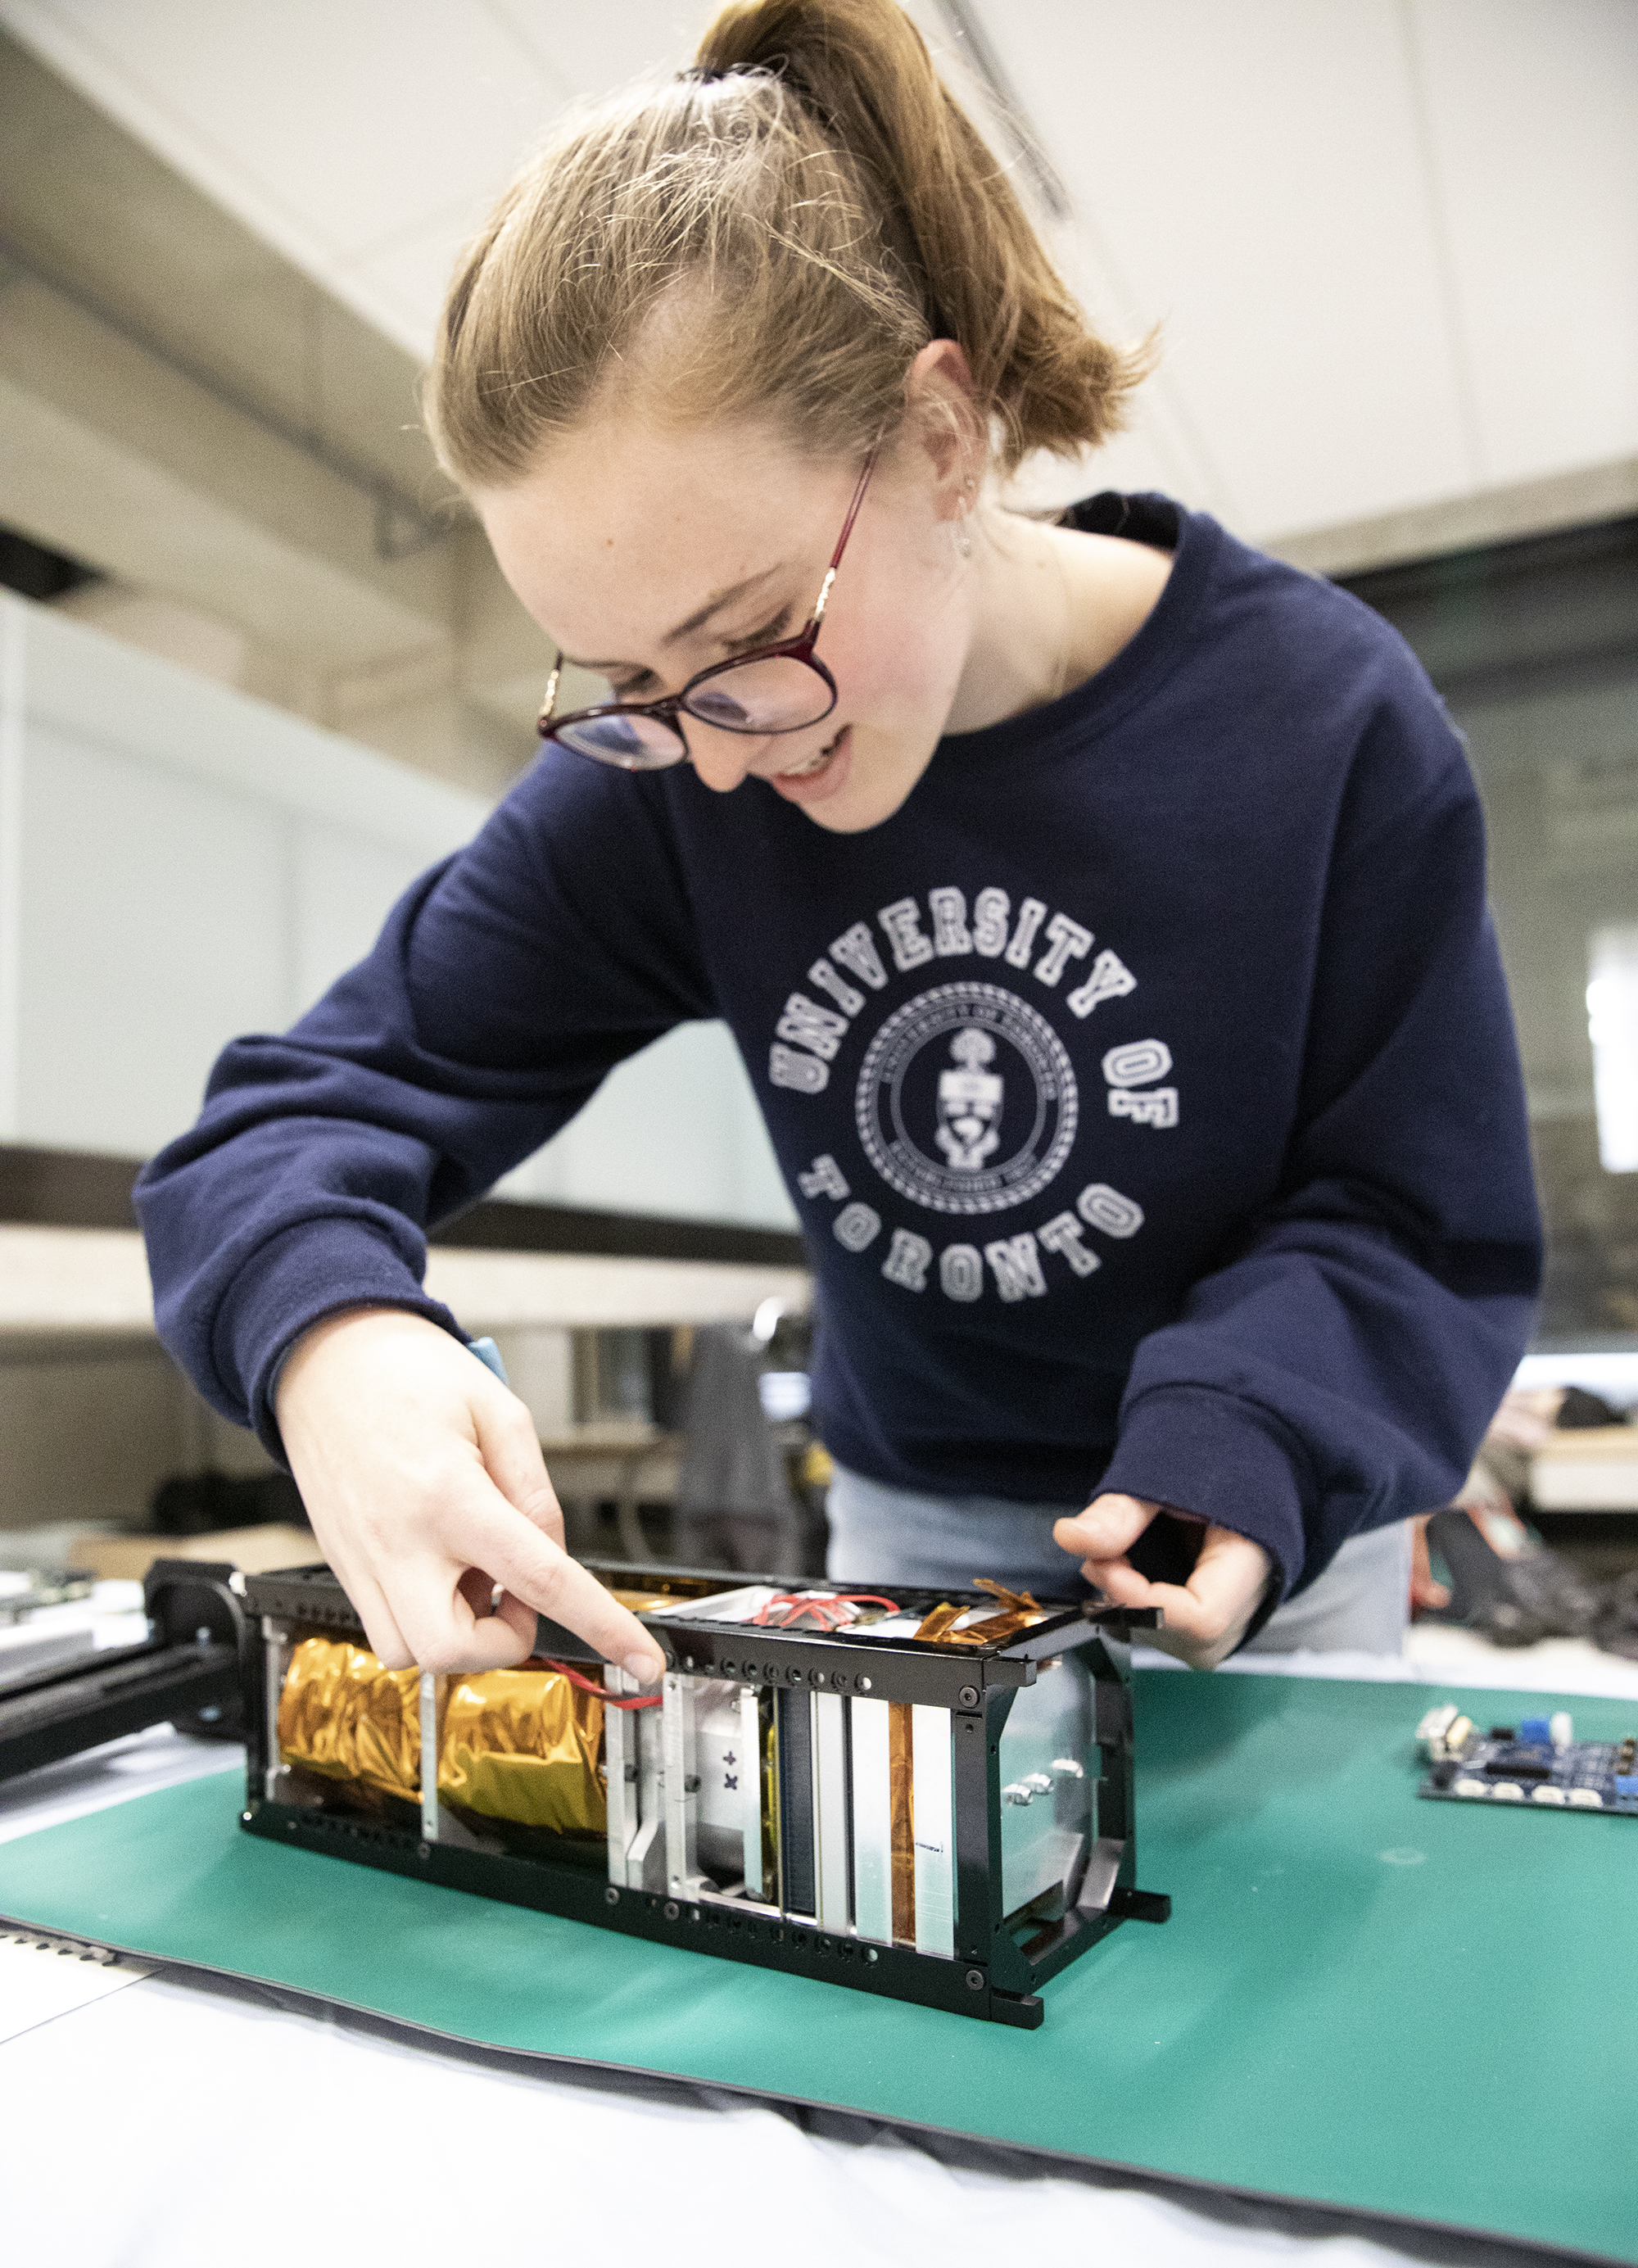 Cassandra Chanen (Year 2 EngSci) shows off the Heron MK II, a cubesat that will take a microbiology payload to space. (Credit: Erica Rae Chong)